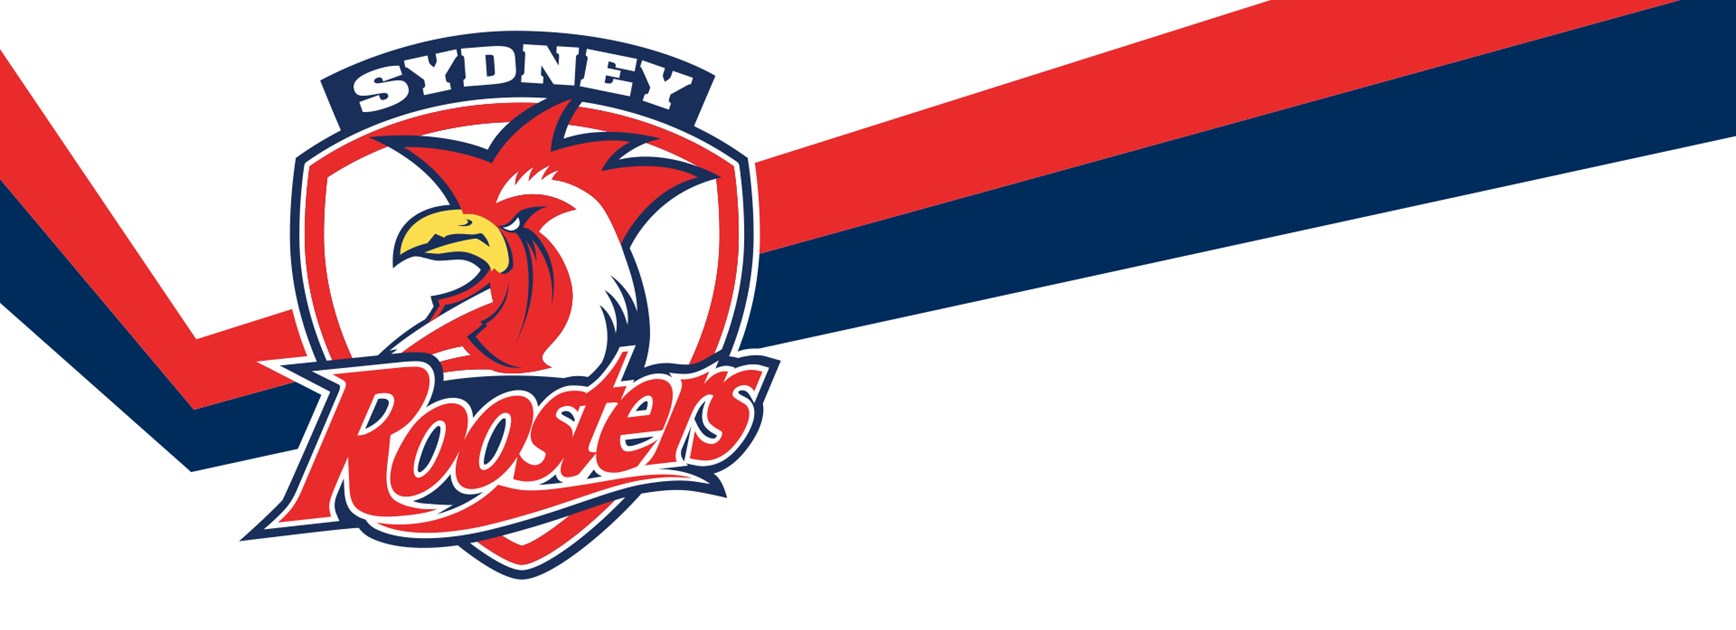 Sydney Roosters Centre of Excellence funding announcement